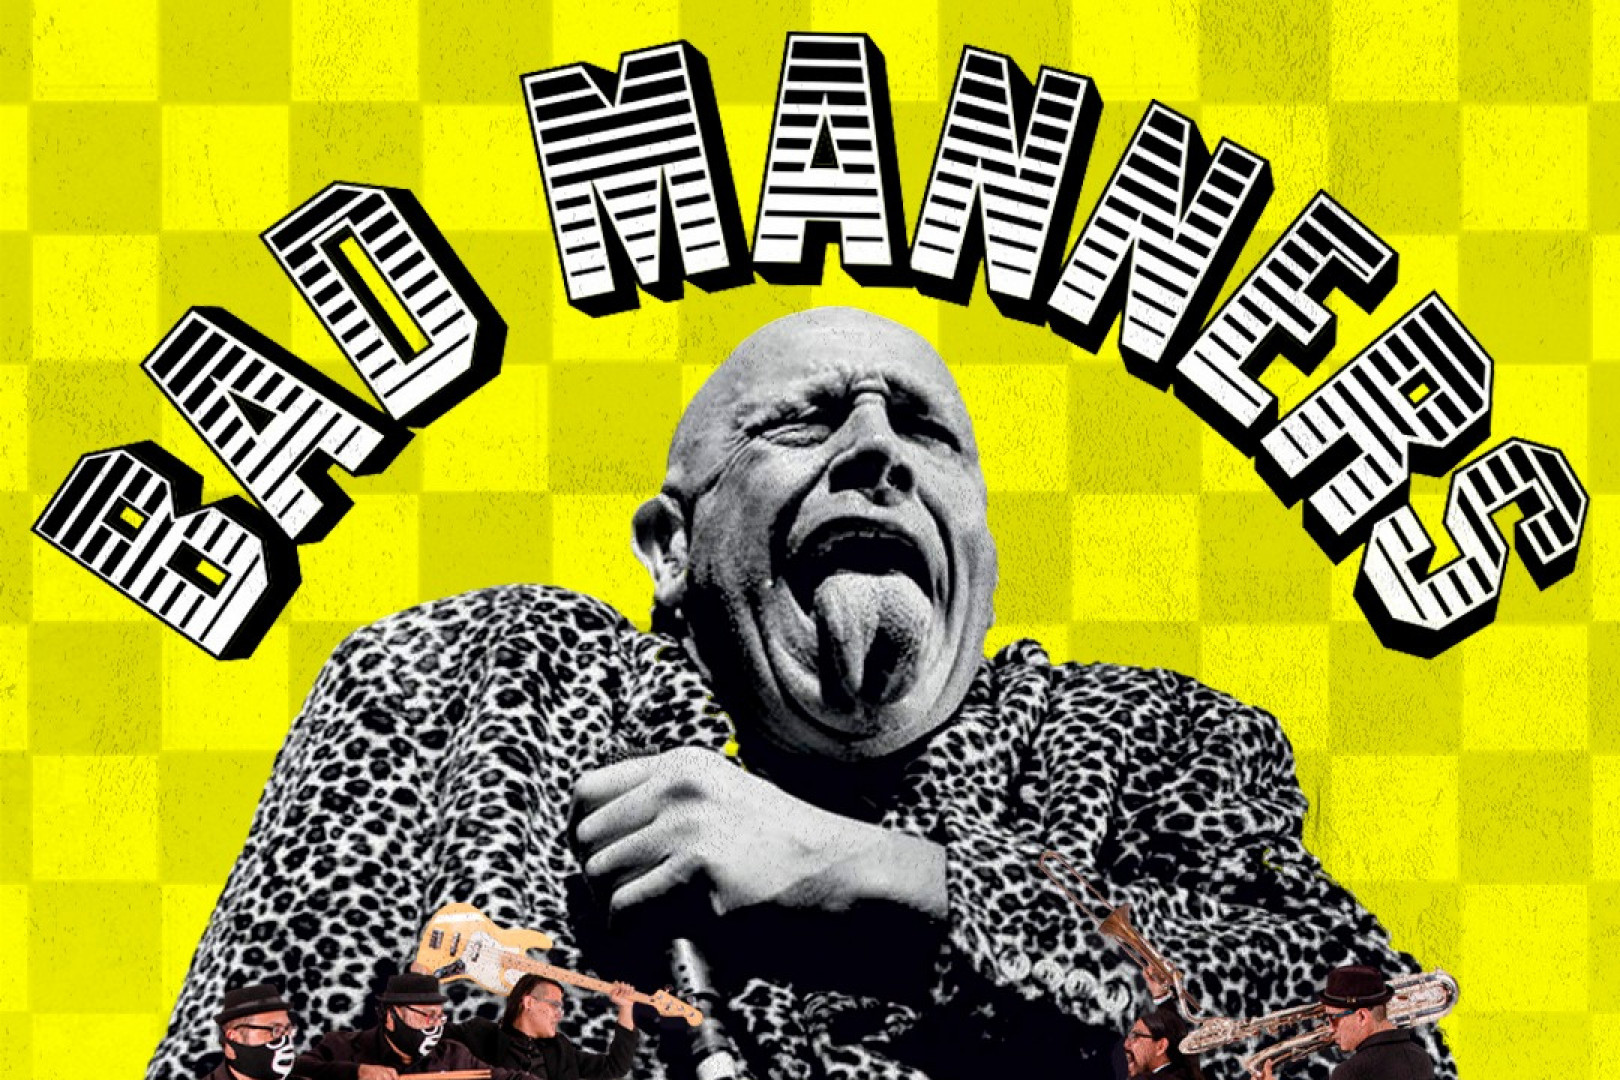 Philamoca and Punknews are thrilled to present Bad Manners in Philly on September 20!!!